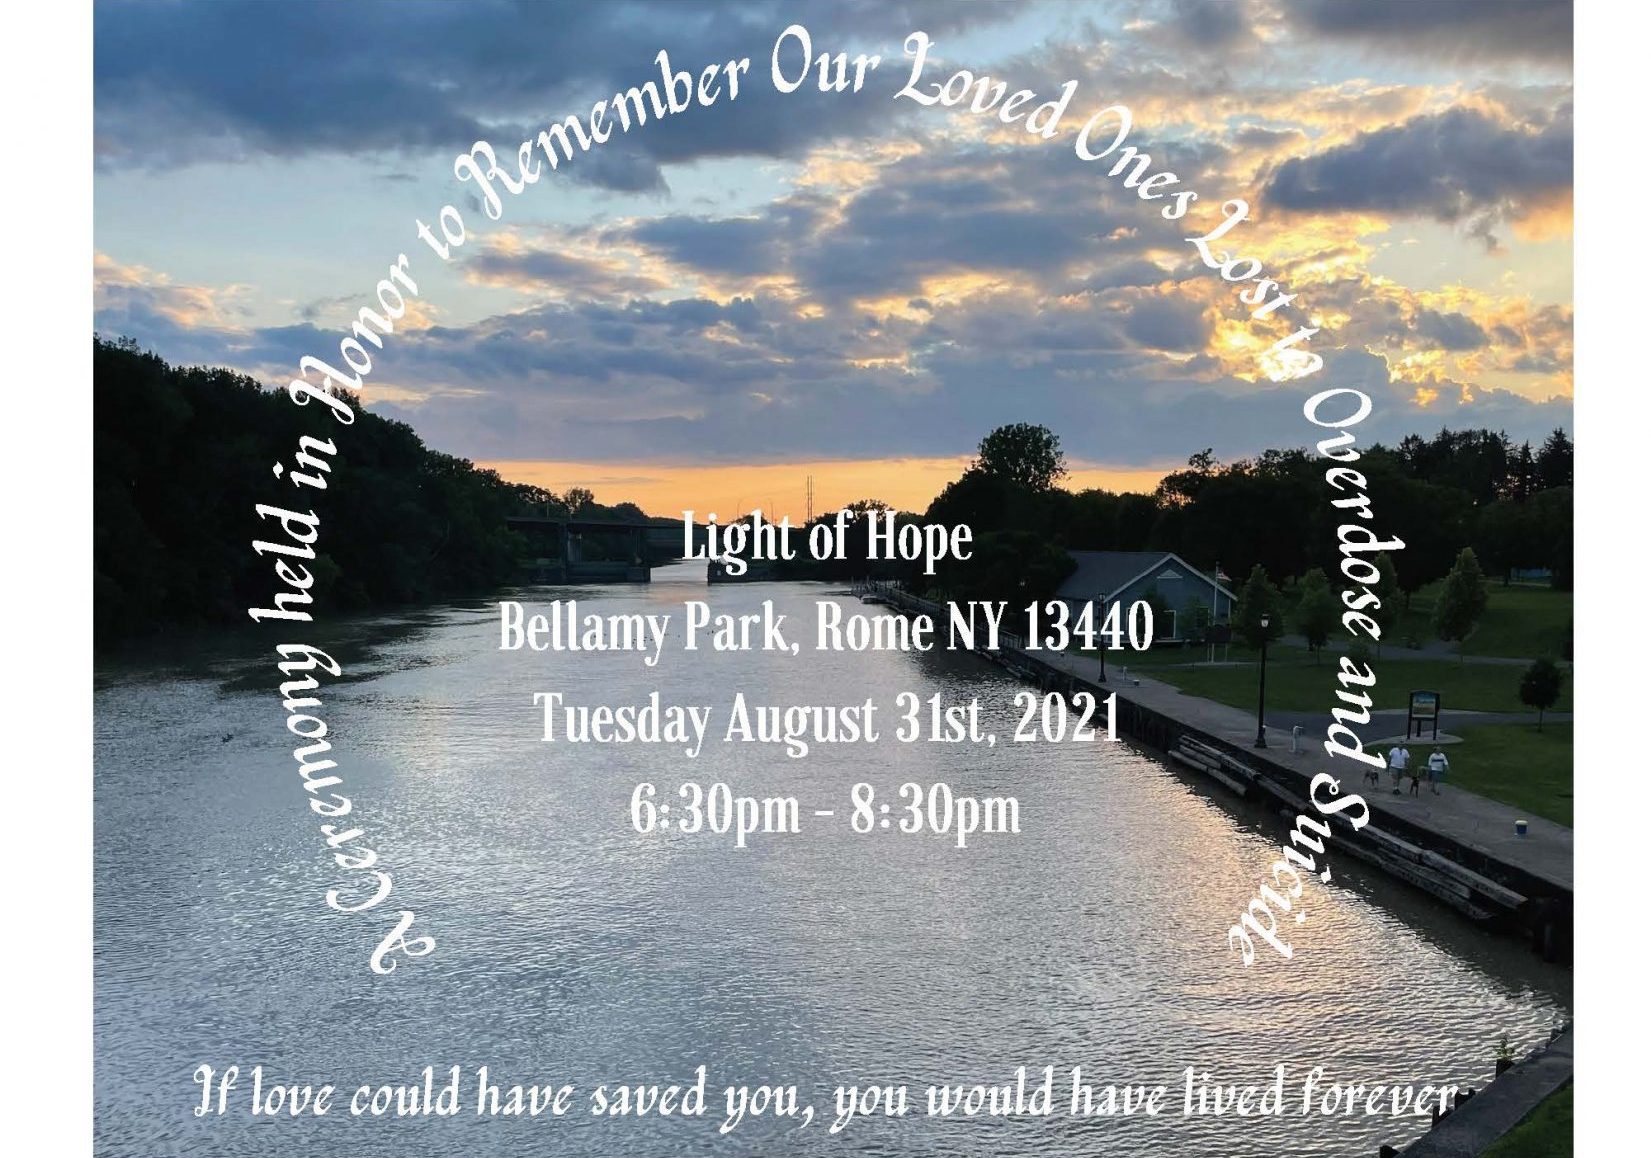 Center for Family Life and Recovery, Inc. Light of Hope event to take place on Tuesday, August 31, 2021